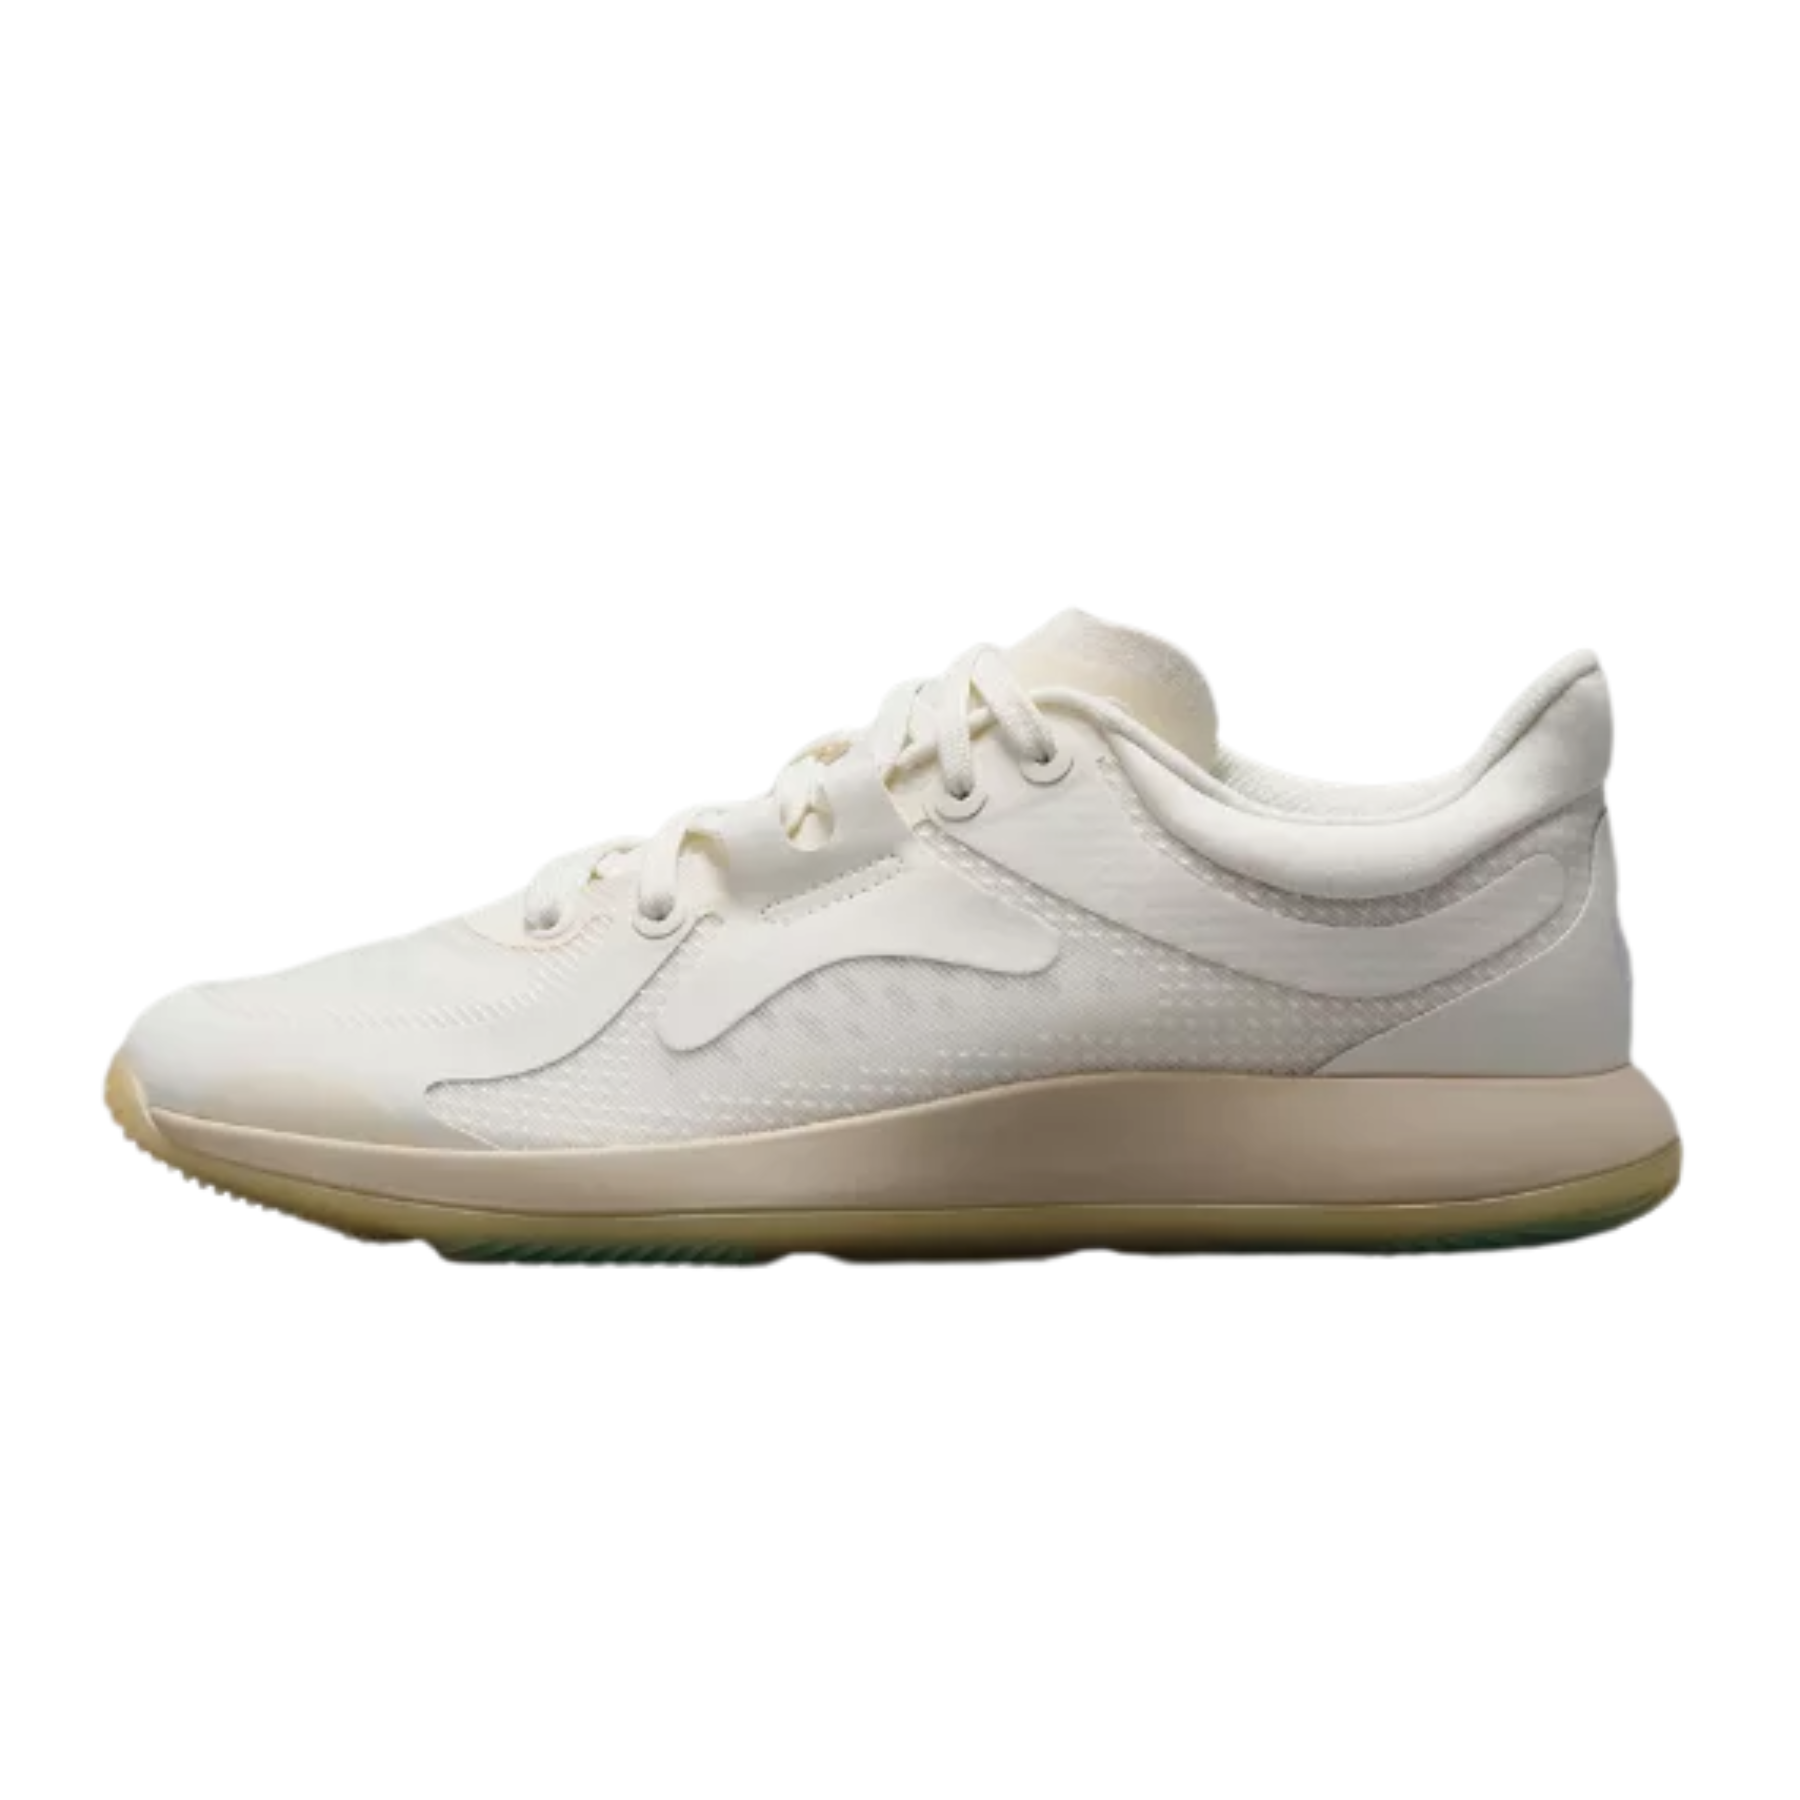 Cut out image of Lululemon Strongfeel trainers in white 